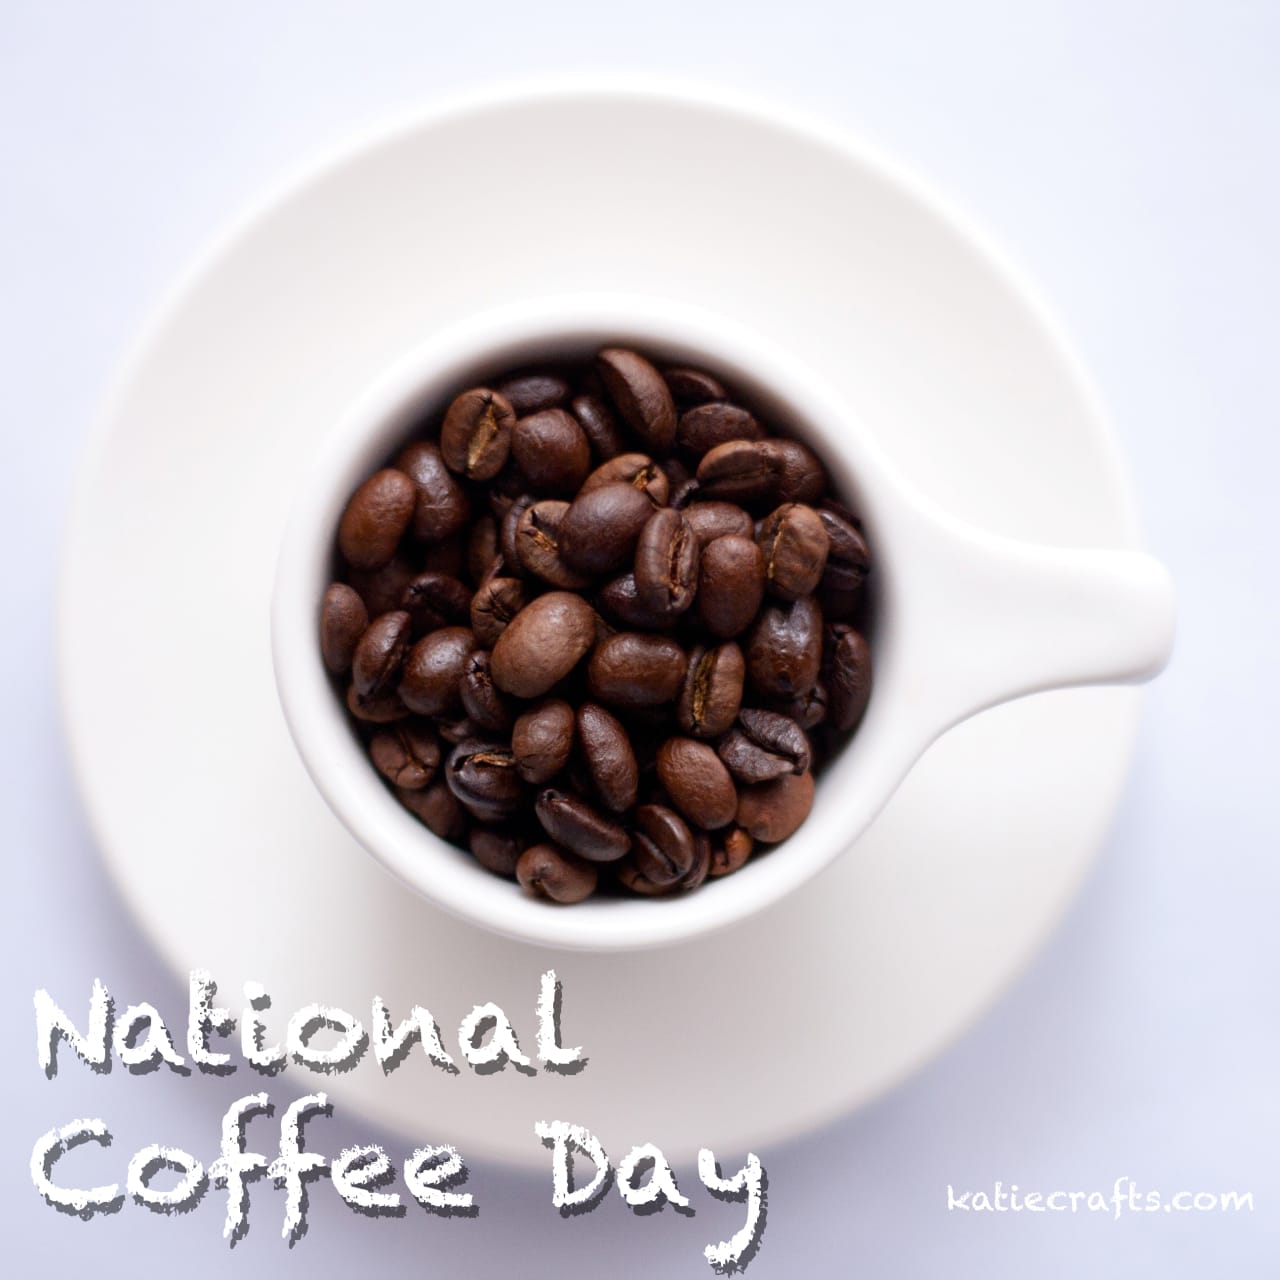 Coffee with the Husband: National Coffee Day on Katie Crafts https://www.katiecrafts.com